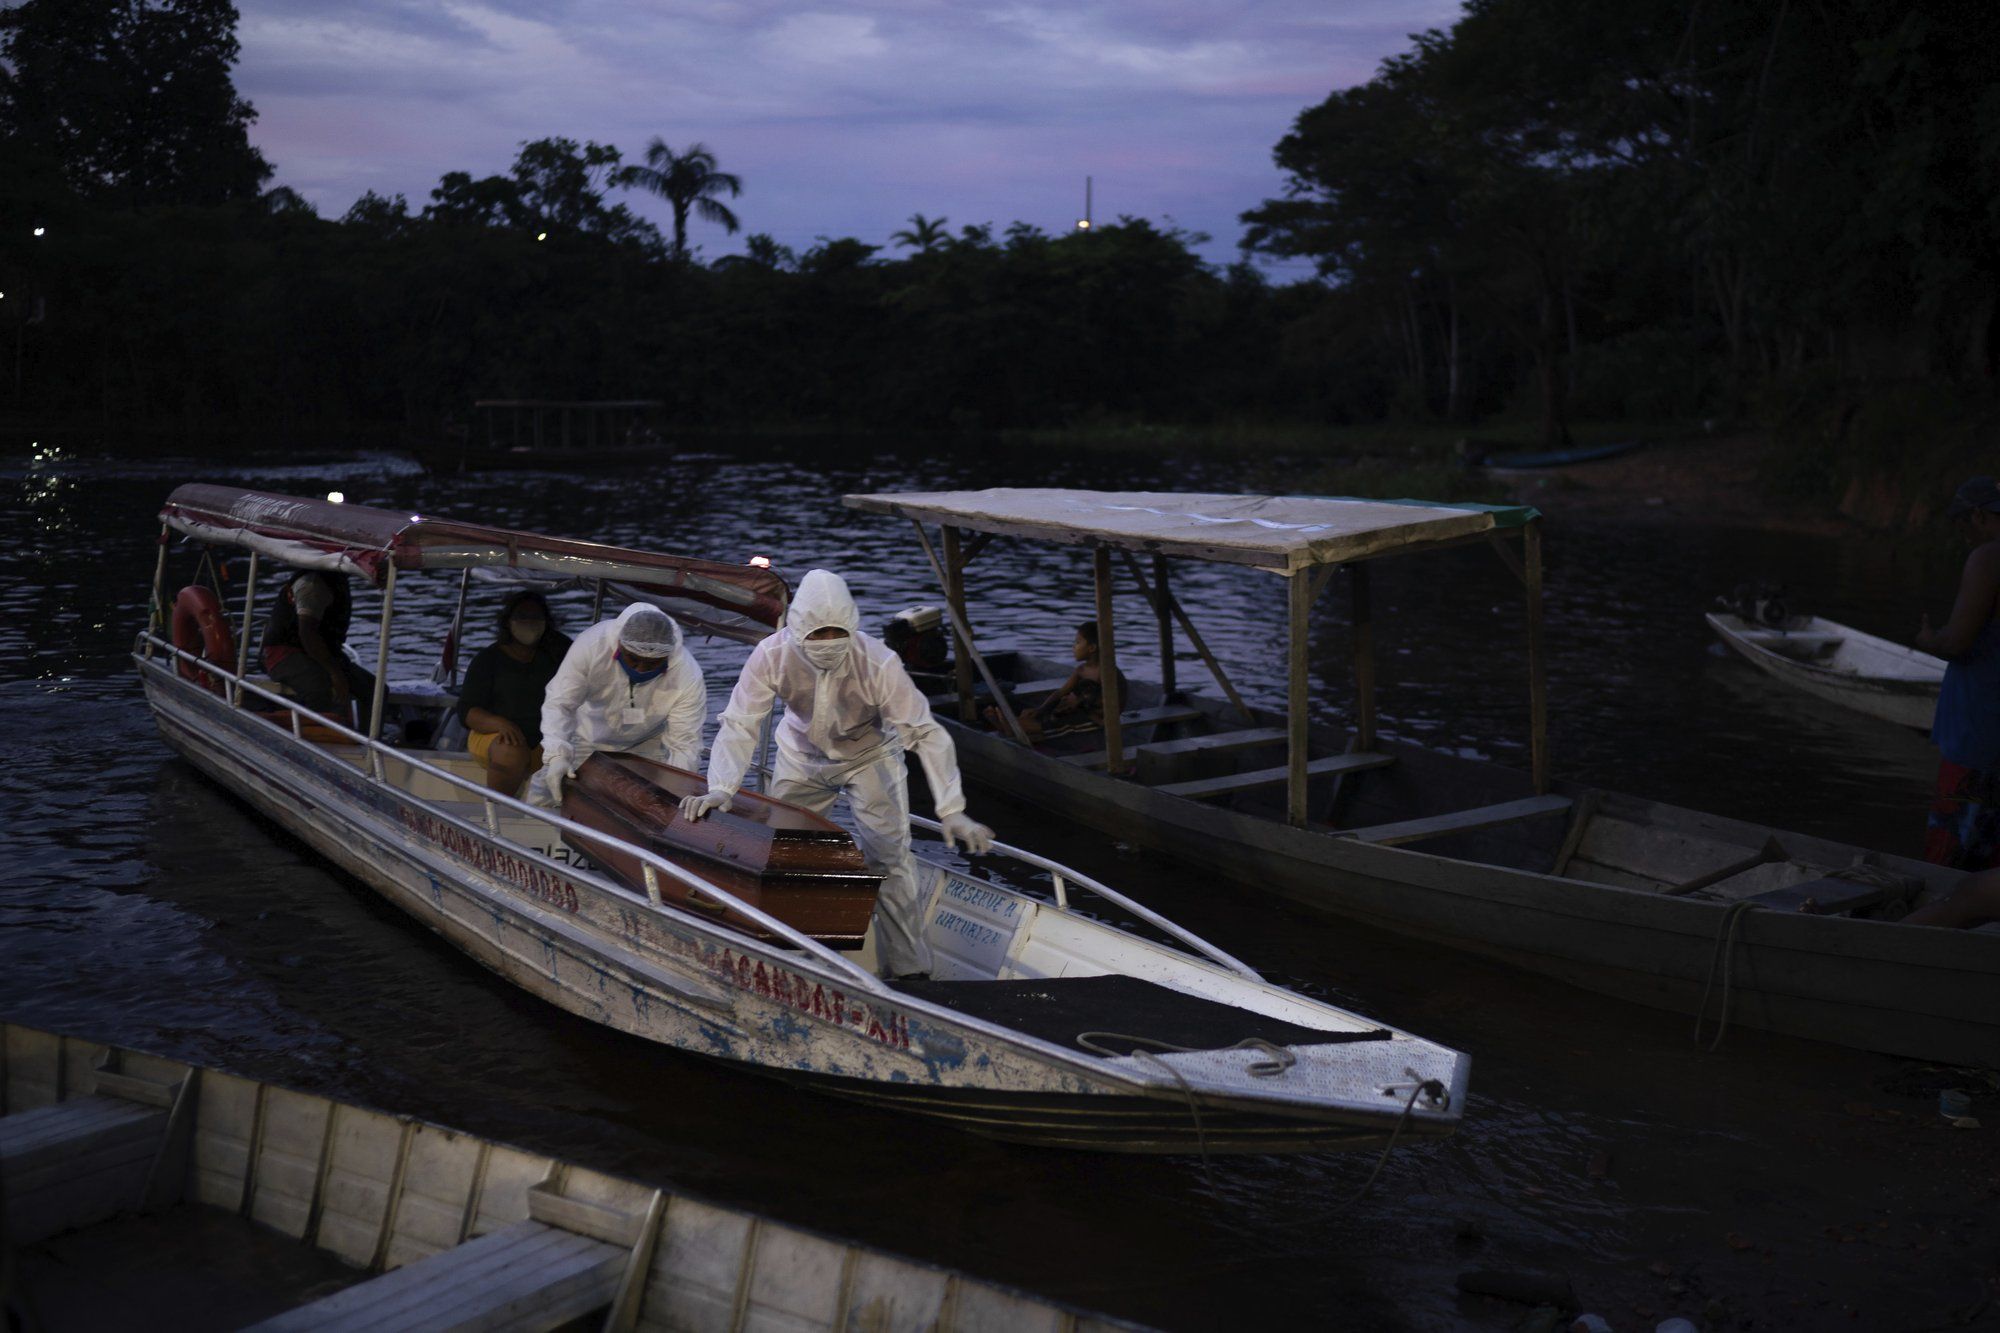 SOS Funeral workers transport by boat a coffin carrying the body of an 86-year-old woman who lived by the Negro River and is a suspected to have died of COVID-19, near Manaus, Brazil, Thursday, May 14, 2020. Image by Felipe Dana / AP Photo. Brazil, 2020.